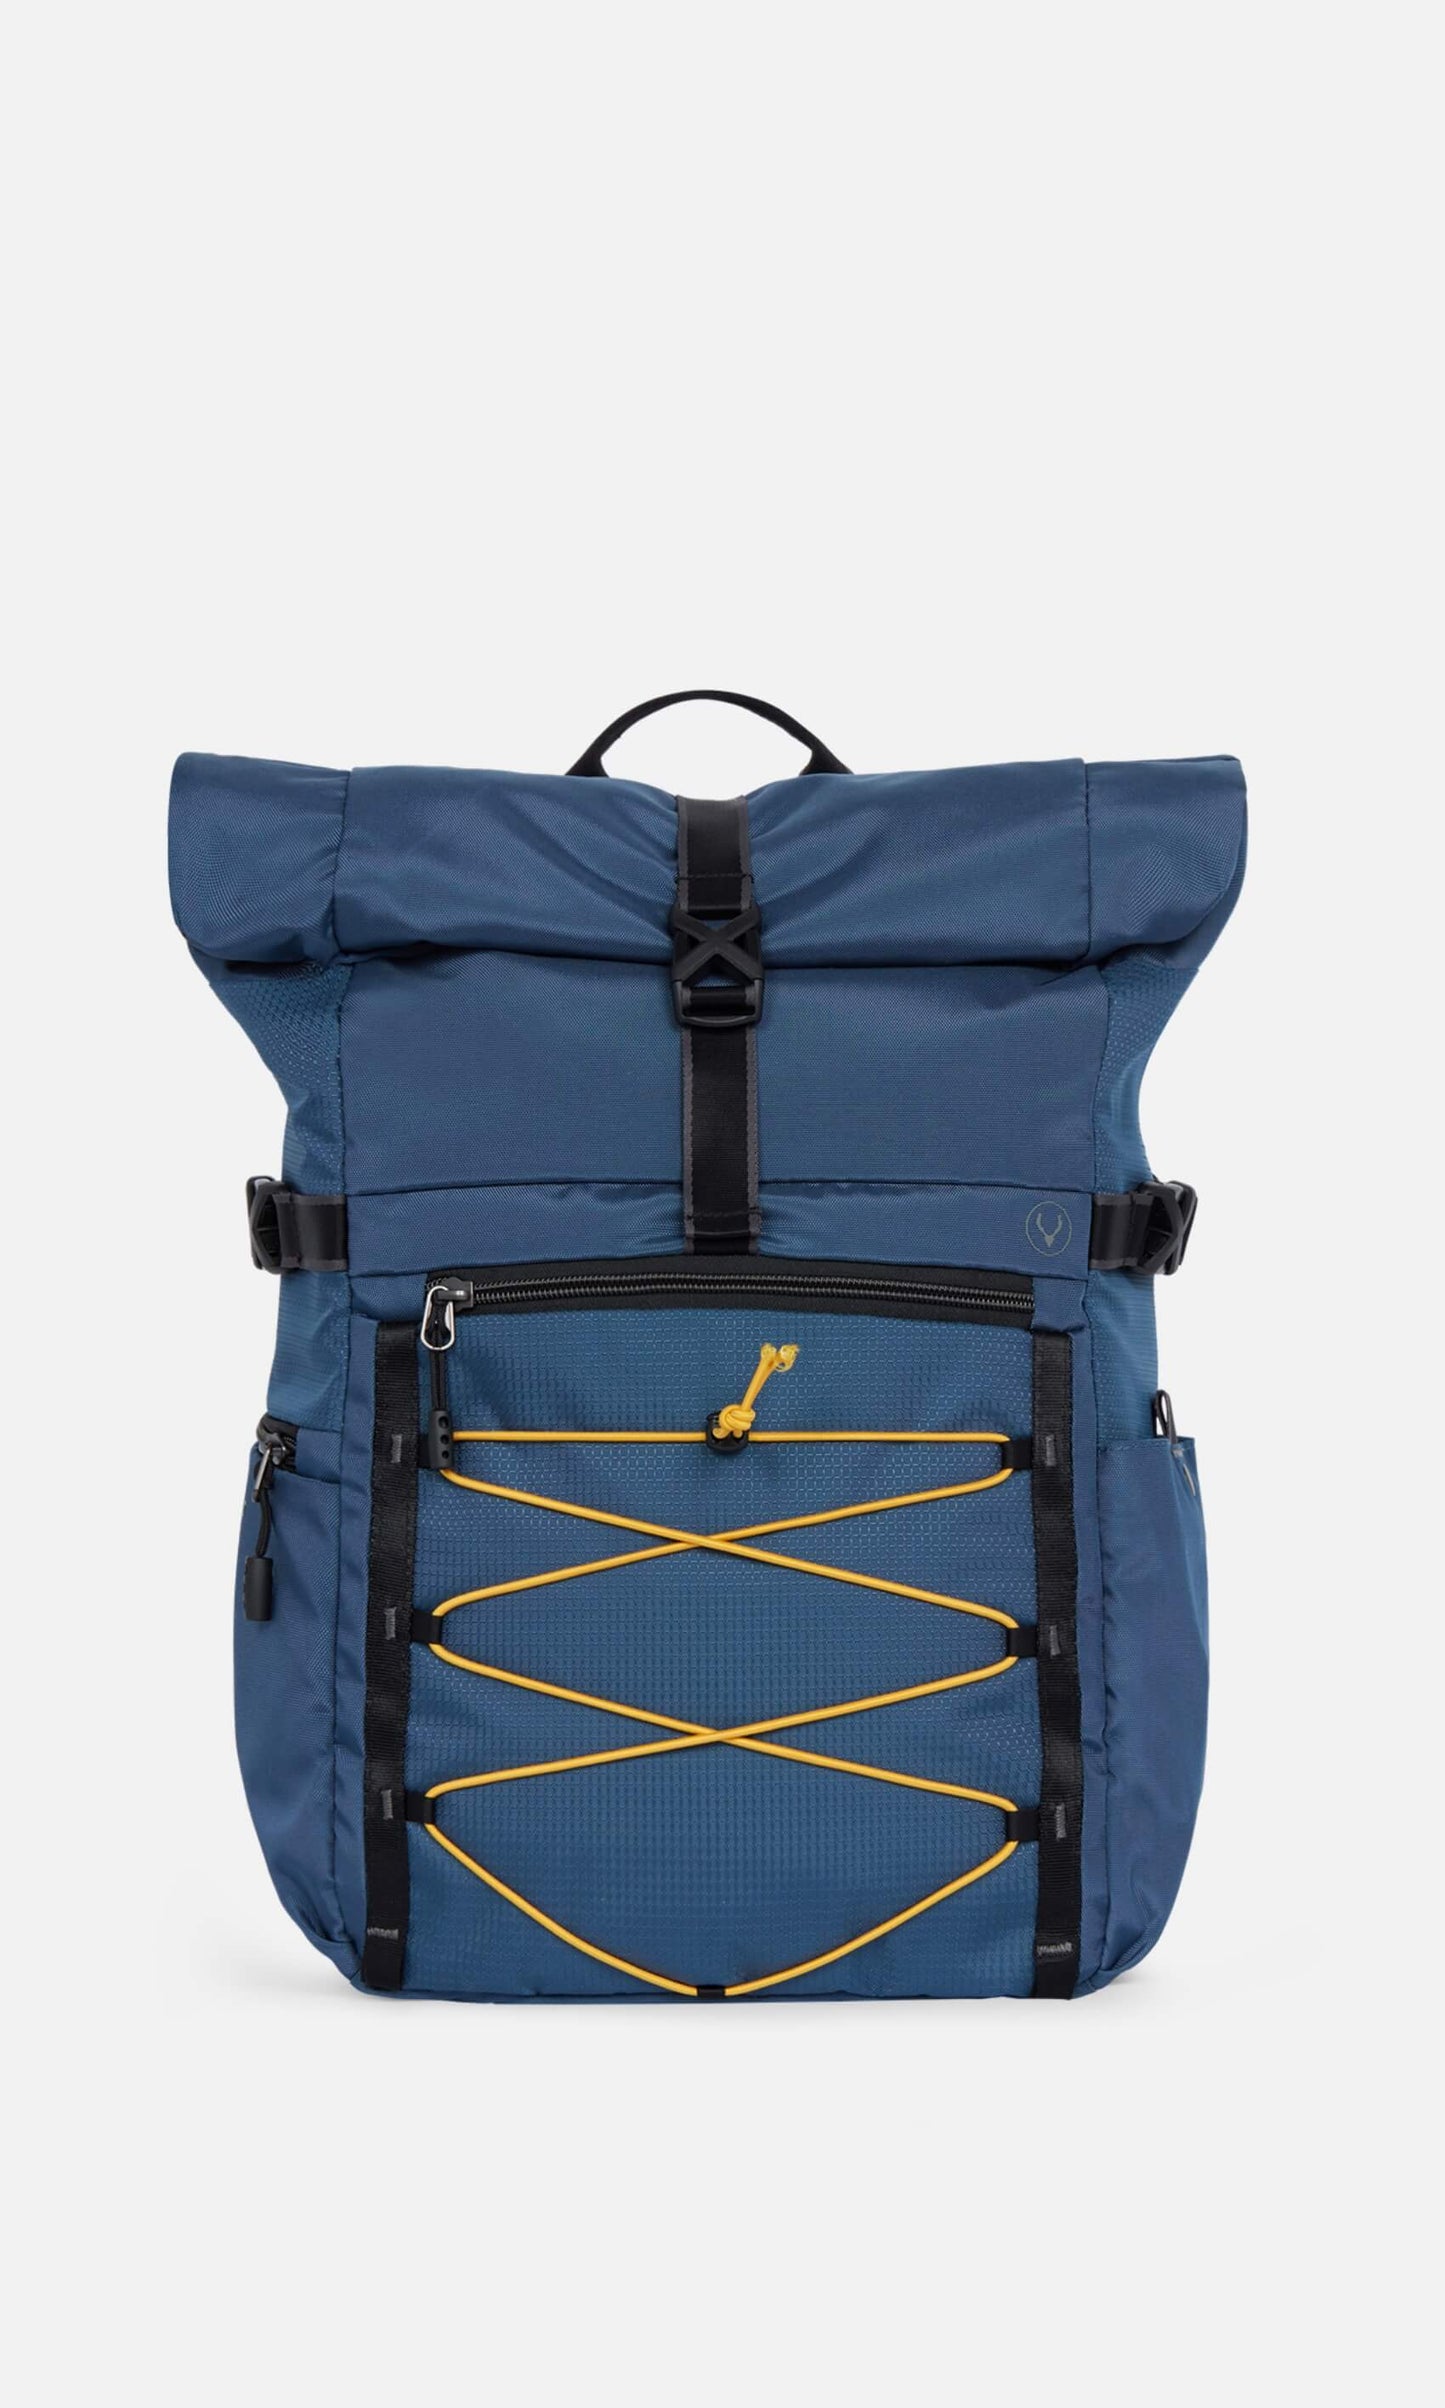 Bamburgh roll top backpack in navy